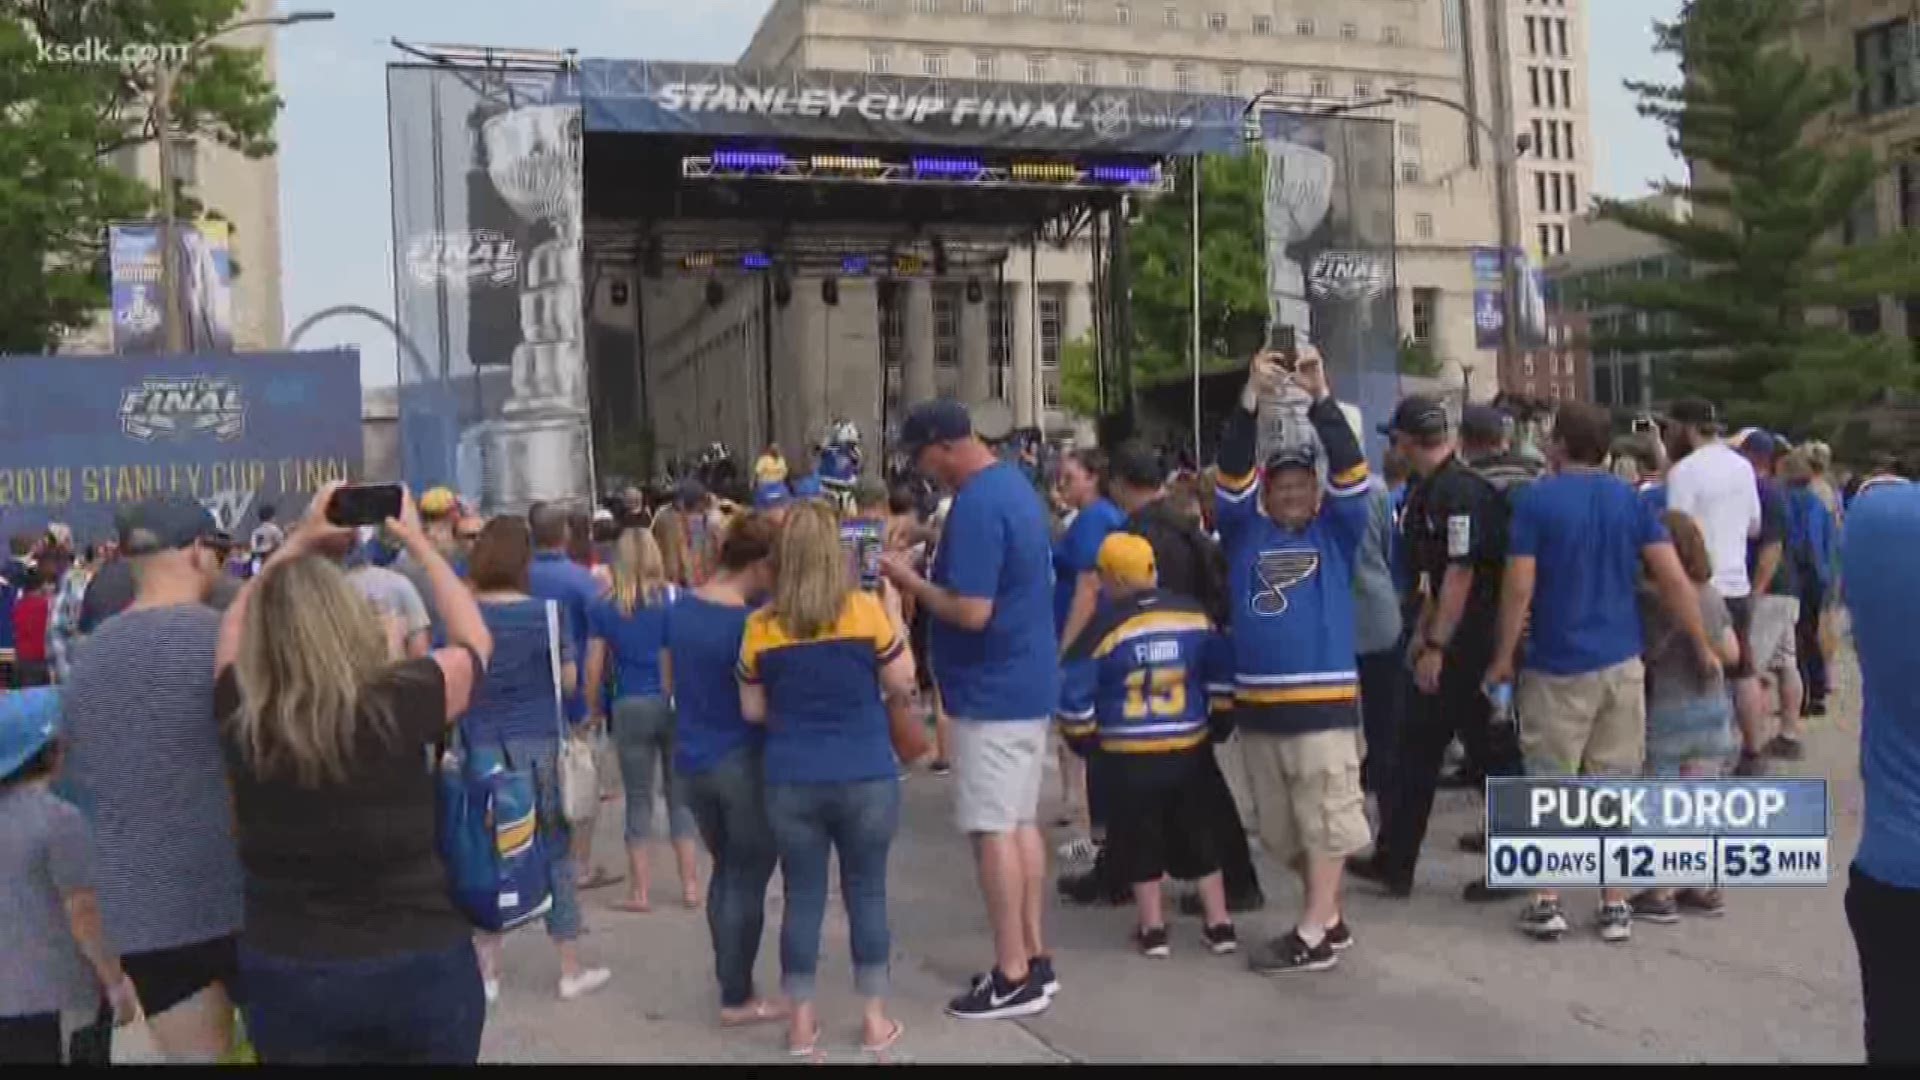 Blues poised to win Stanley Cup in Game 6 Sunday night